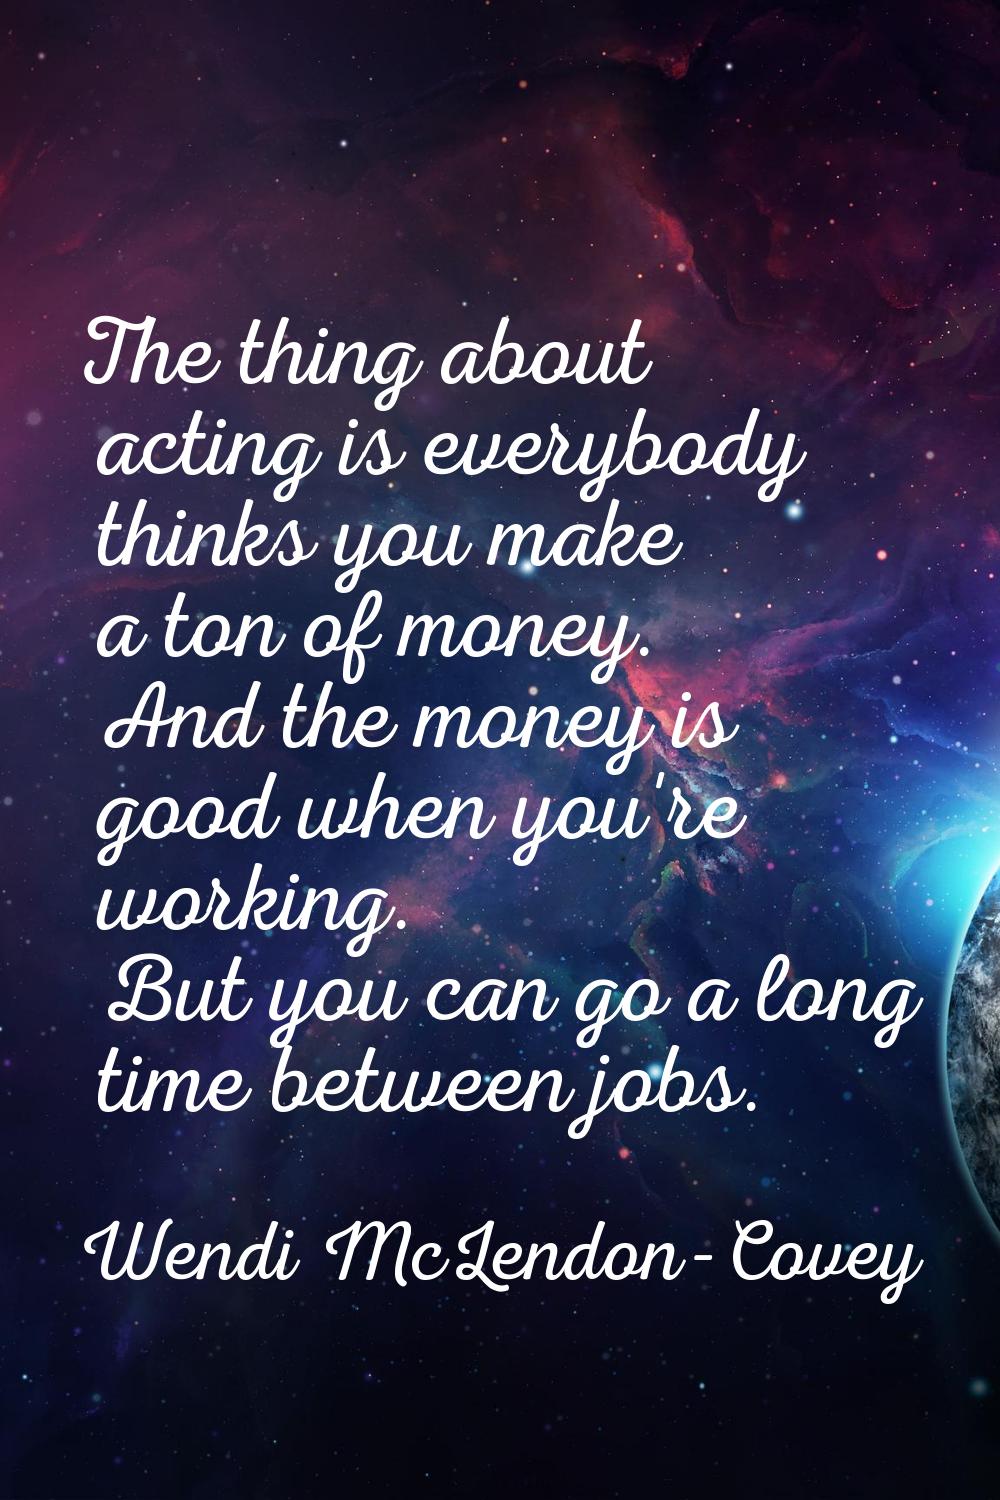 The thing about acting is everybody thinks you make a ton of money. And the money is good when you'